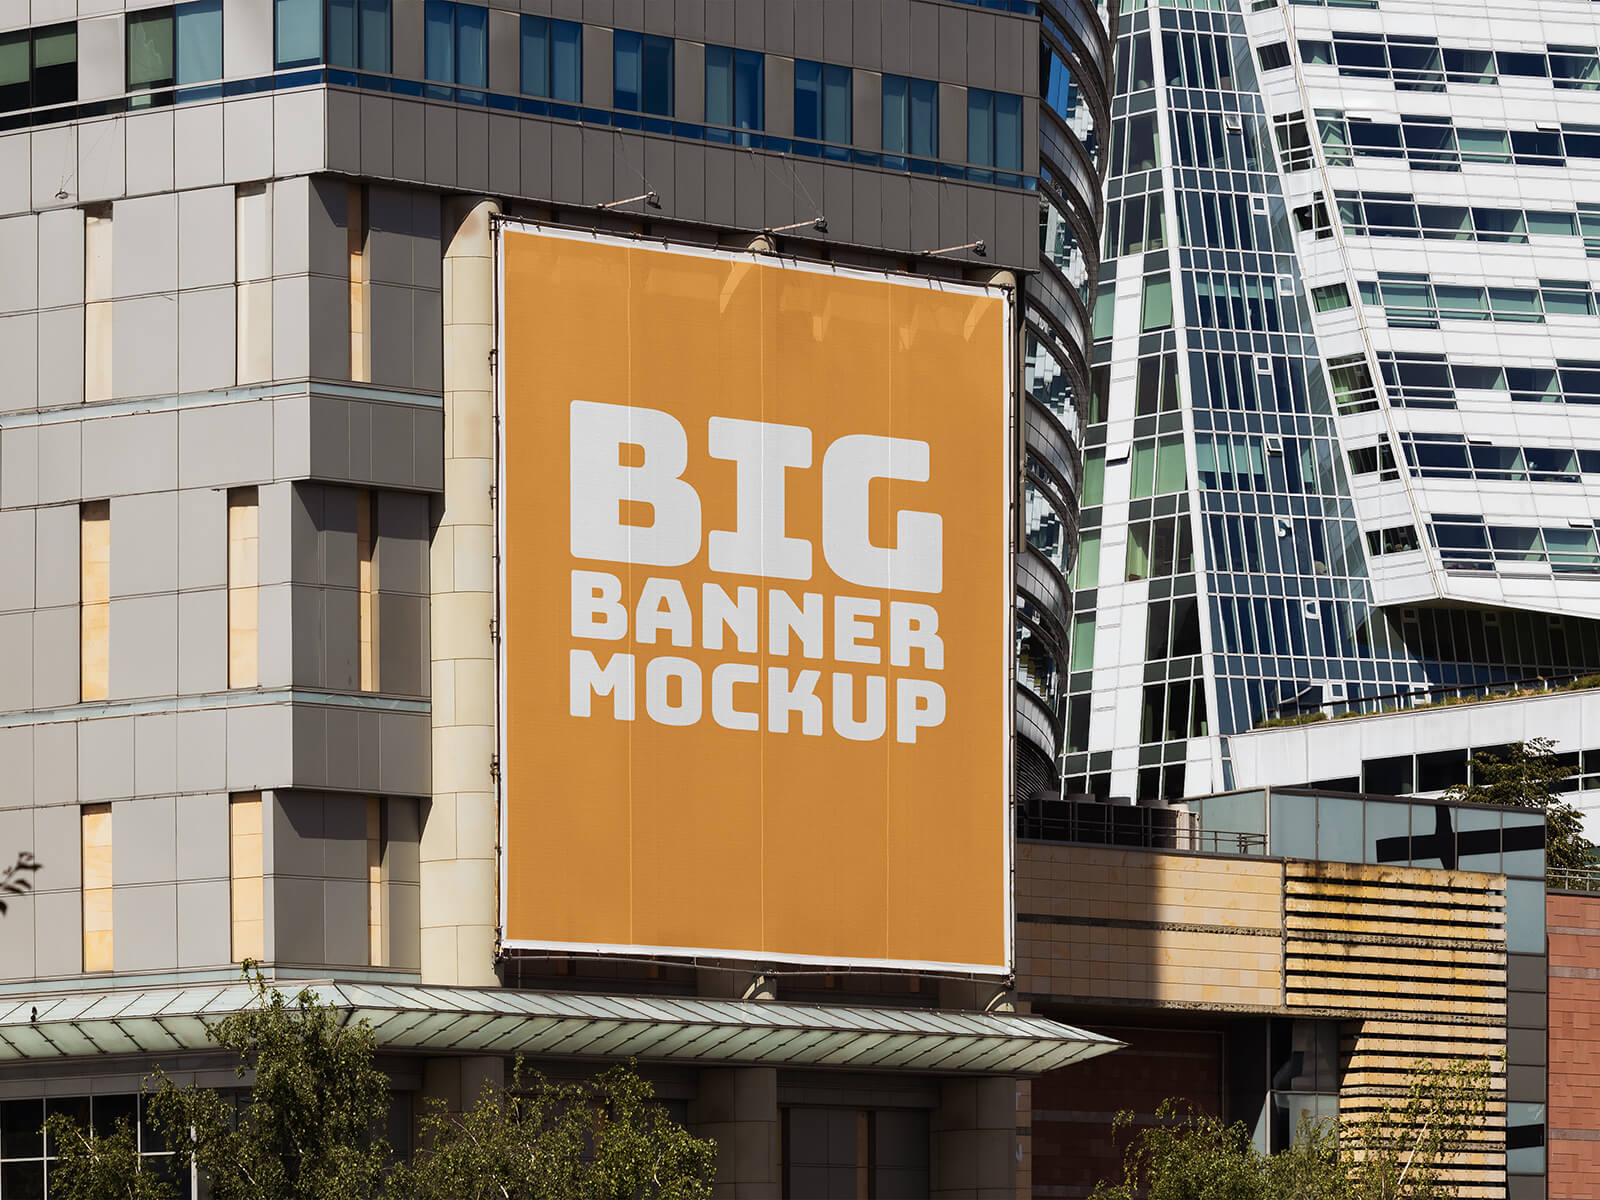 Free Mounted Against Building Wall Large Banner / Billboard Mockup PSD